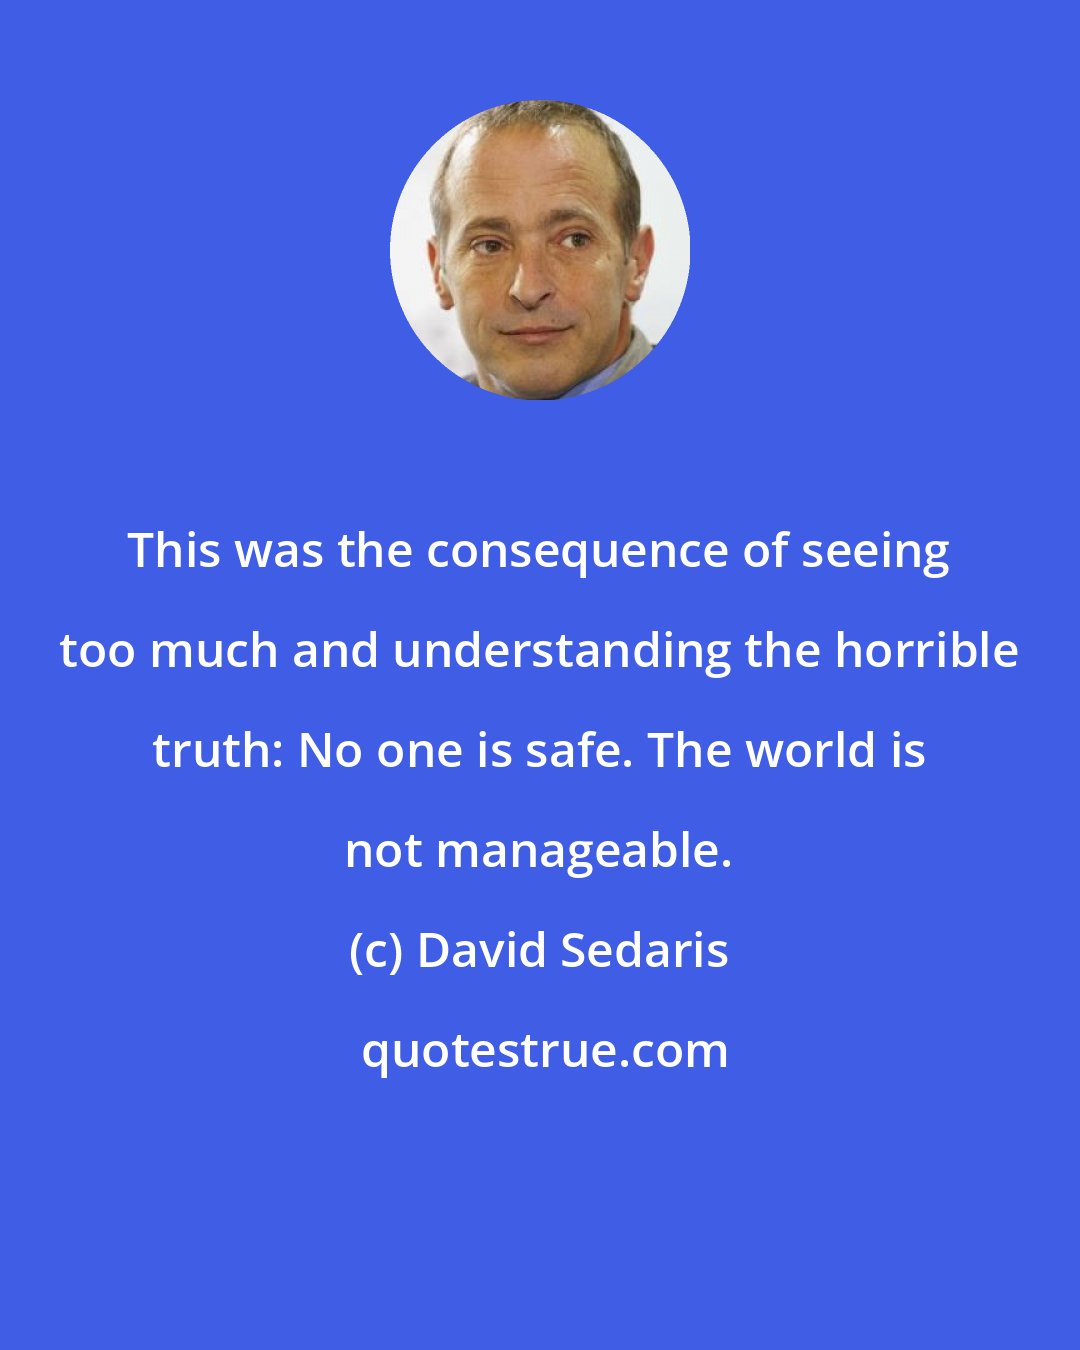 David Sedaris: This was the consequence of seeing too much and understanding the horrible truth: No one is safe. The world is not manageable.